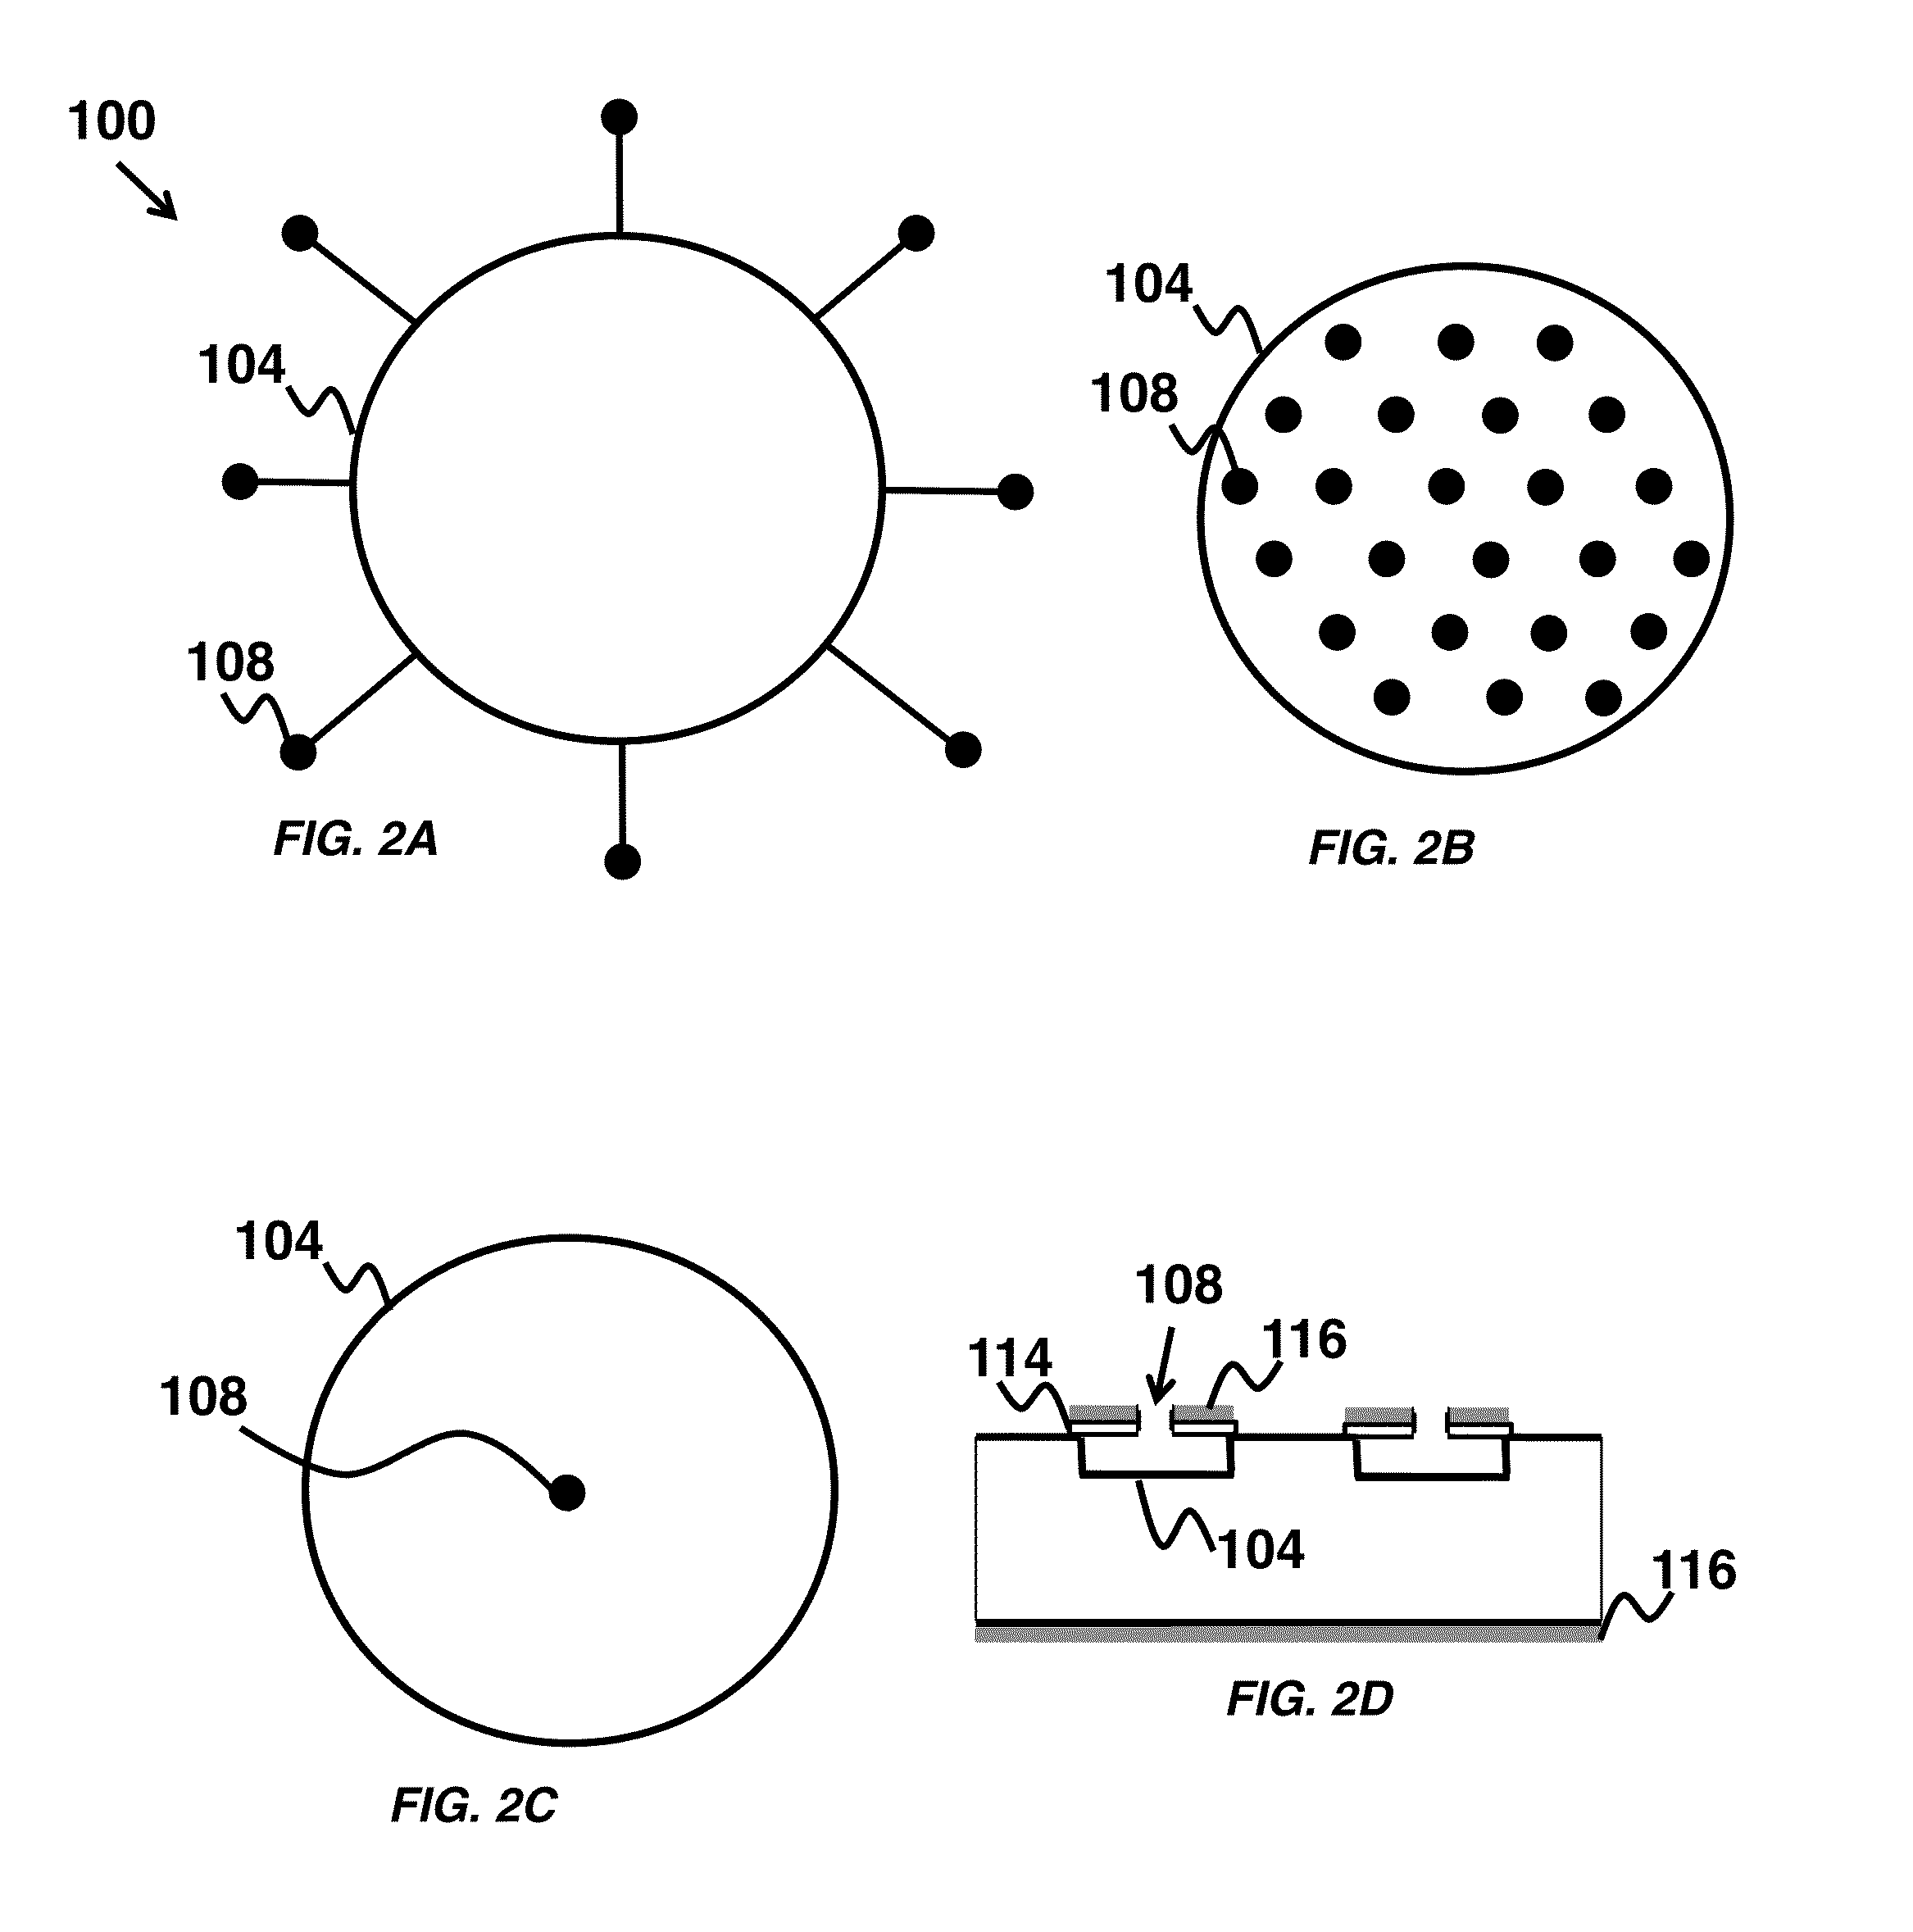 Ultrasonic sensor for object and movement detection